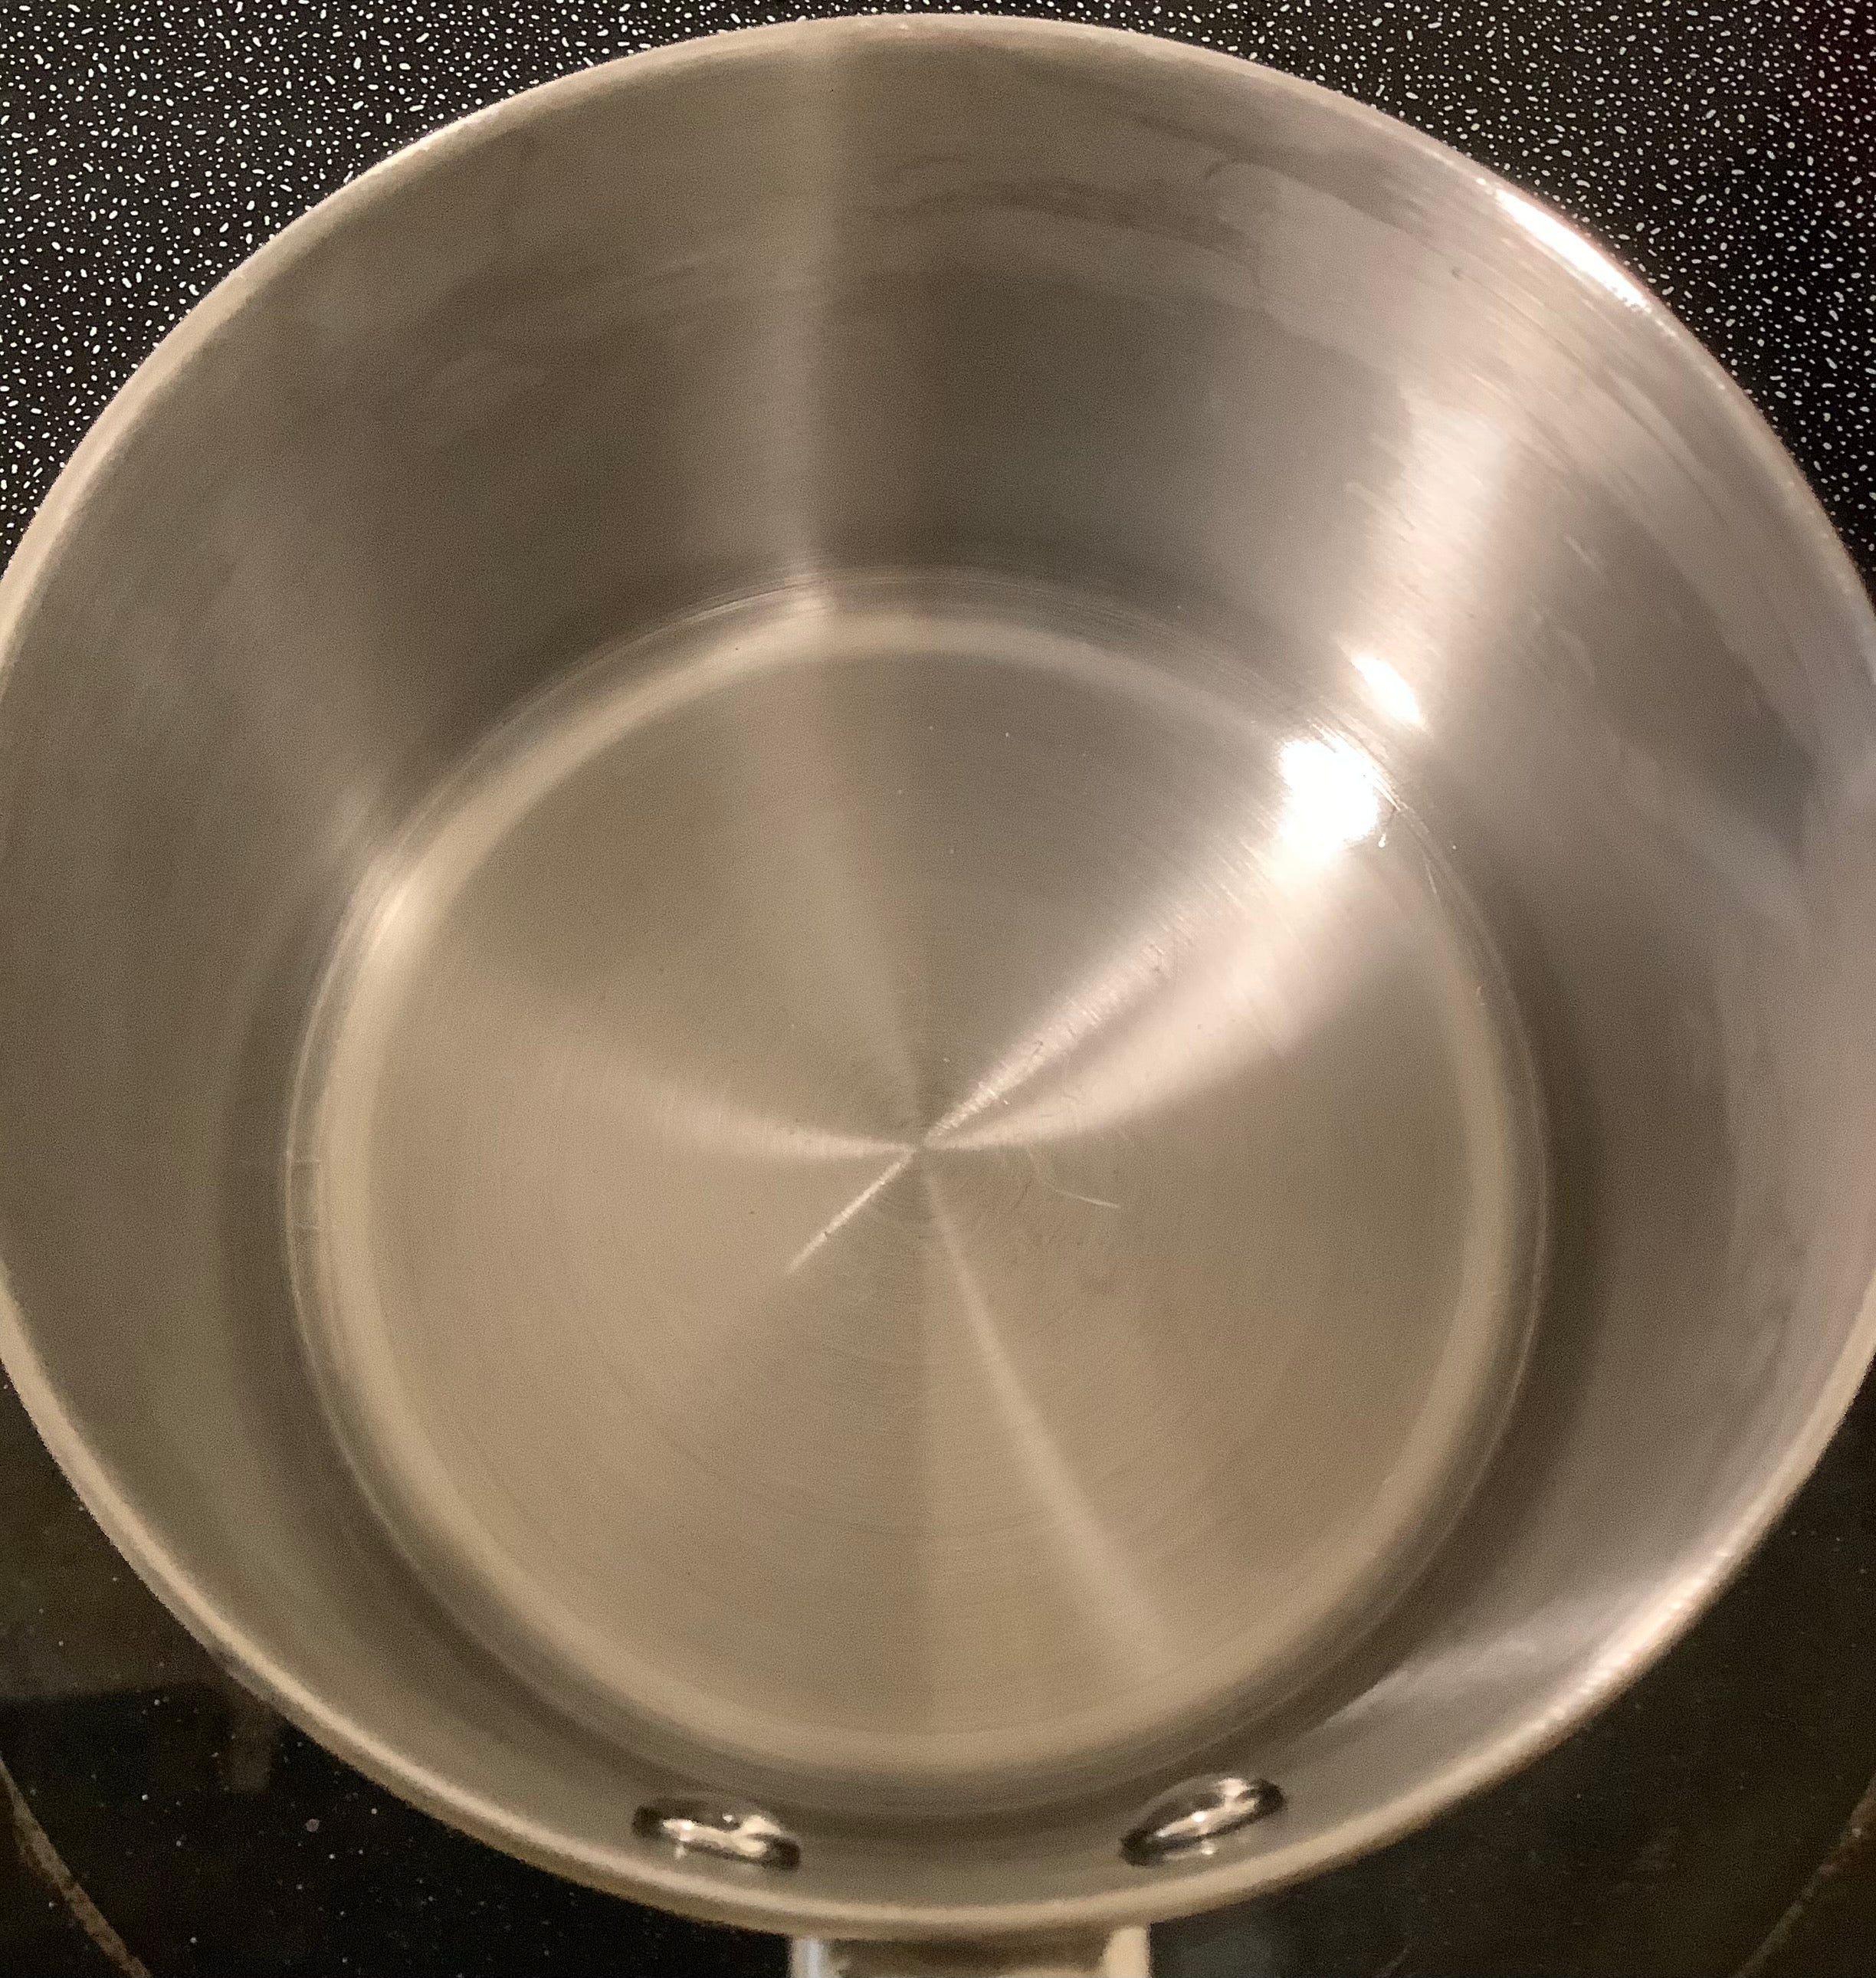 Stainless Steel Cooking Pot With Burnt Scorched Damage After Cleaning